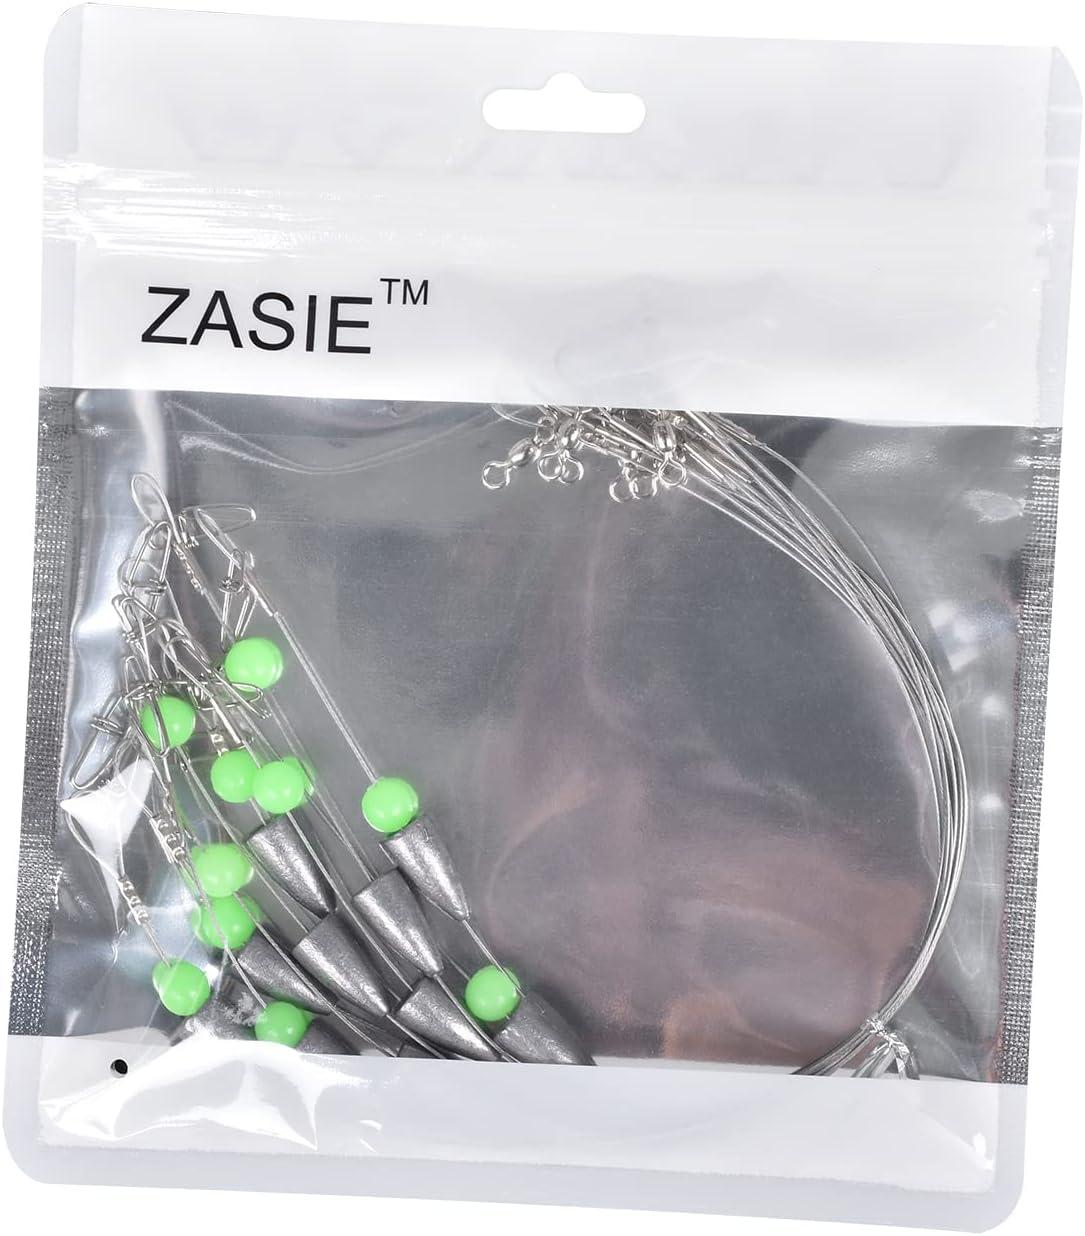 ZASIE Carolina Rigs for Fishing- 12 Inch Steel Fishing Leaders with Fishing  Weight, Pre Rigged Carolina Rigs with Fishing Weight 1/6oz, 1/4oz, 1/2oz,  10 Pcs 1/2 oz 12 Inch